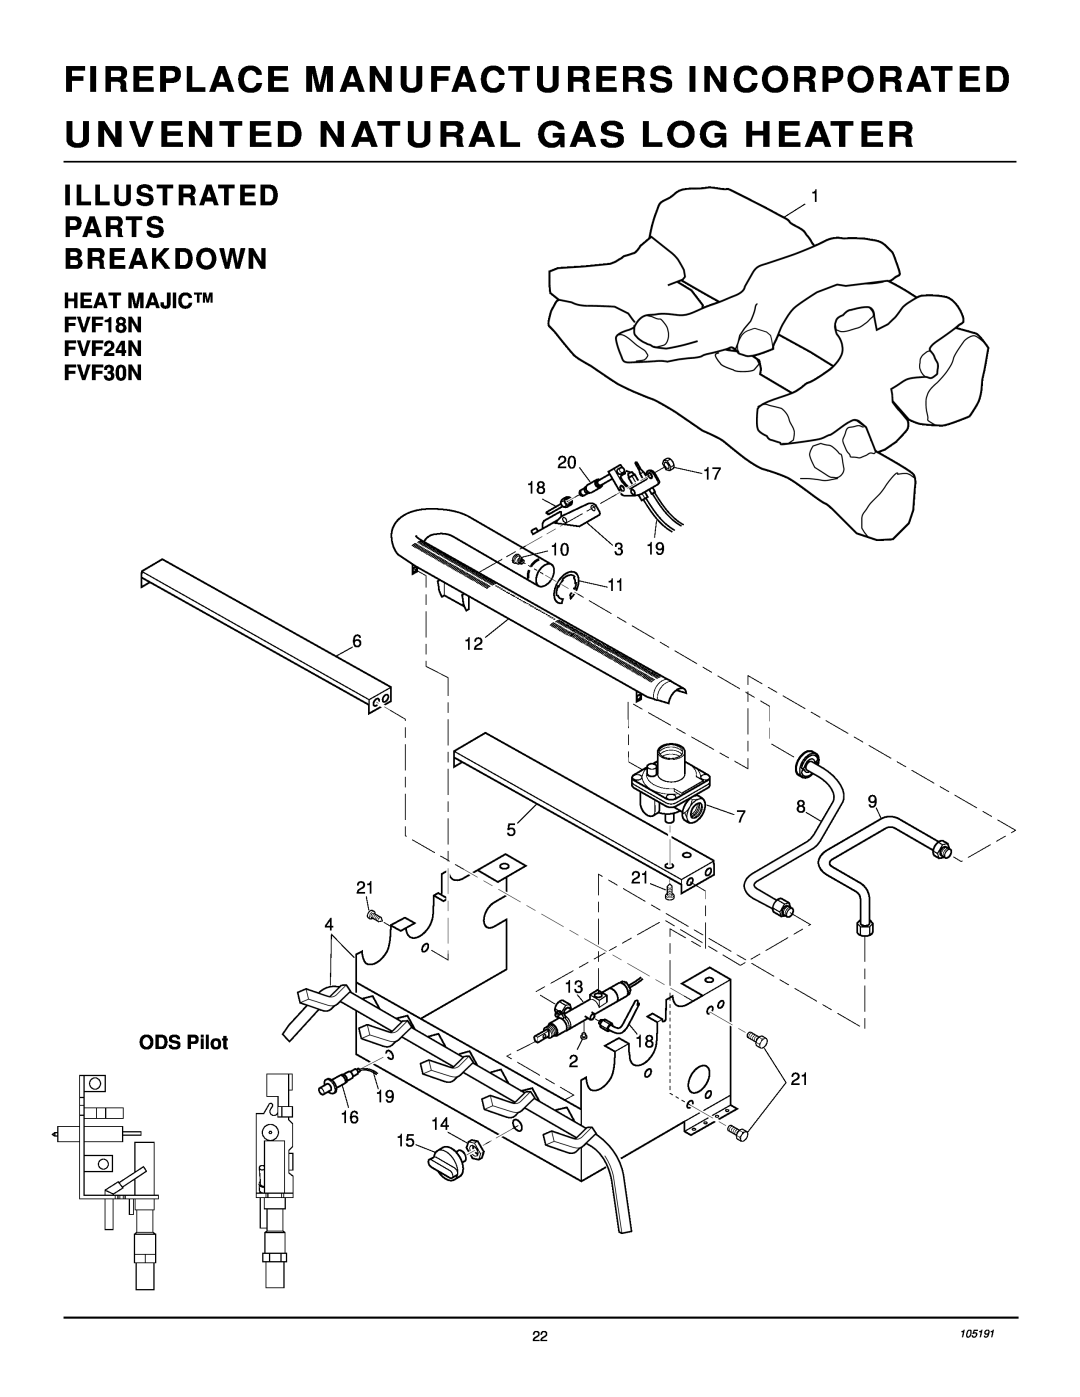 Desa FVF18N Illustrated Parts Breakdown, Fireplace Manufacturers Incorporated, Unvented Natural Gas Log Heater, 105191 